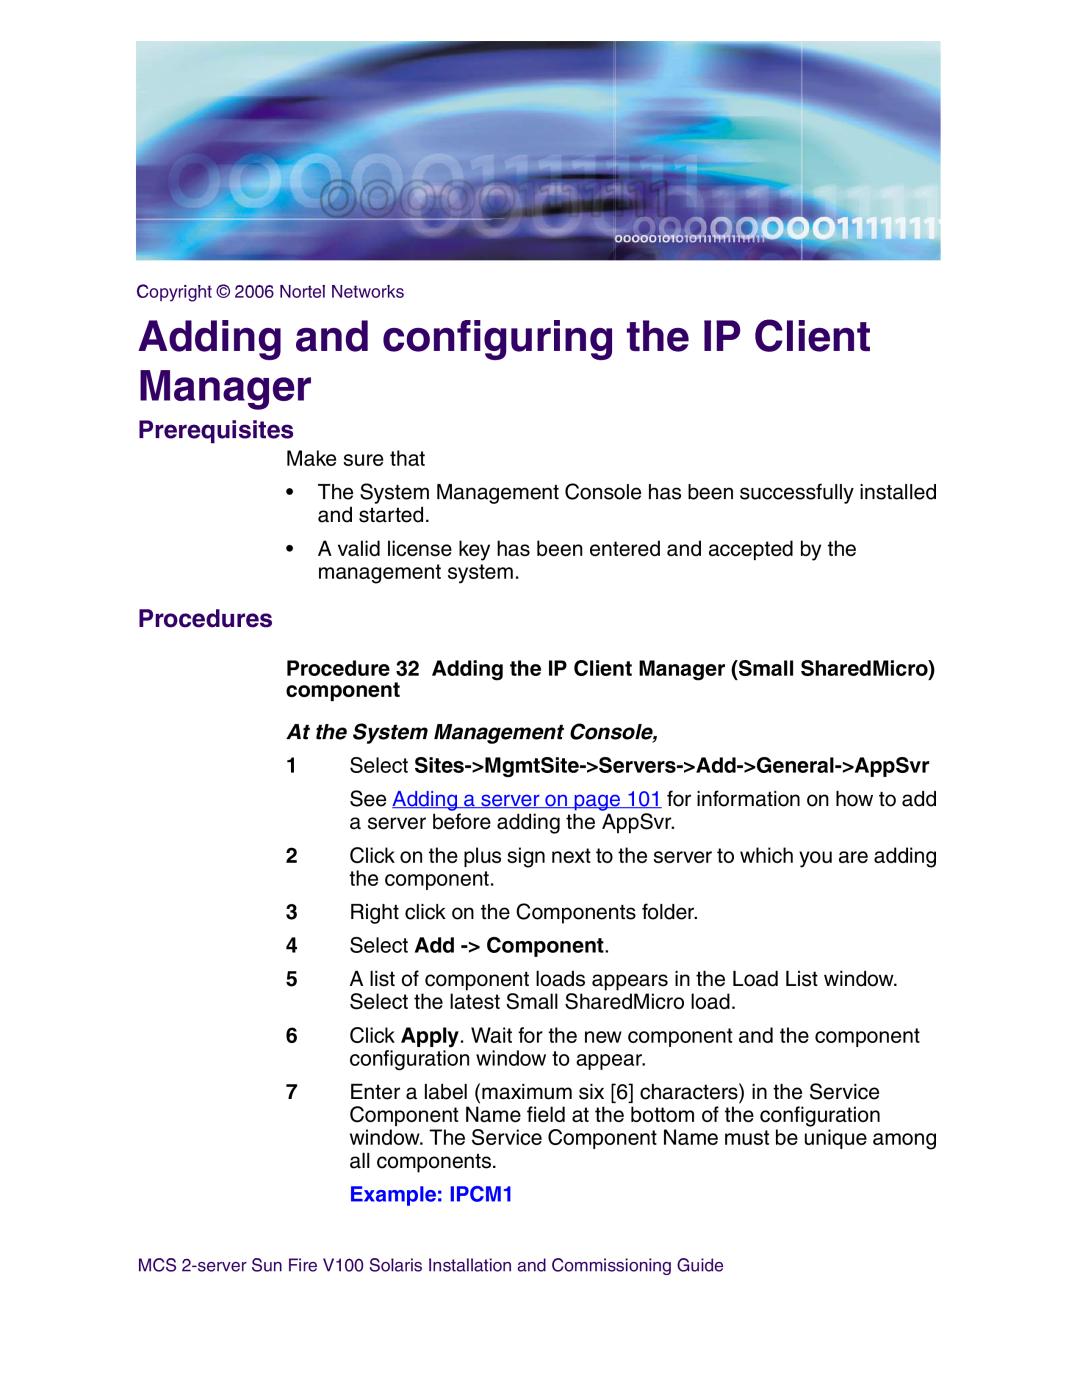 Nortel Networks V100 manual Adding and configuring the IP Client Manager, Example IPCM1, Prerequisites, Procedures 